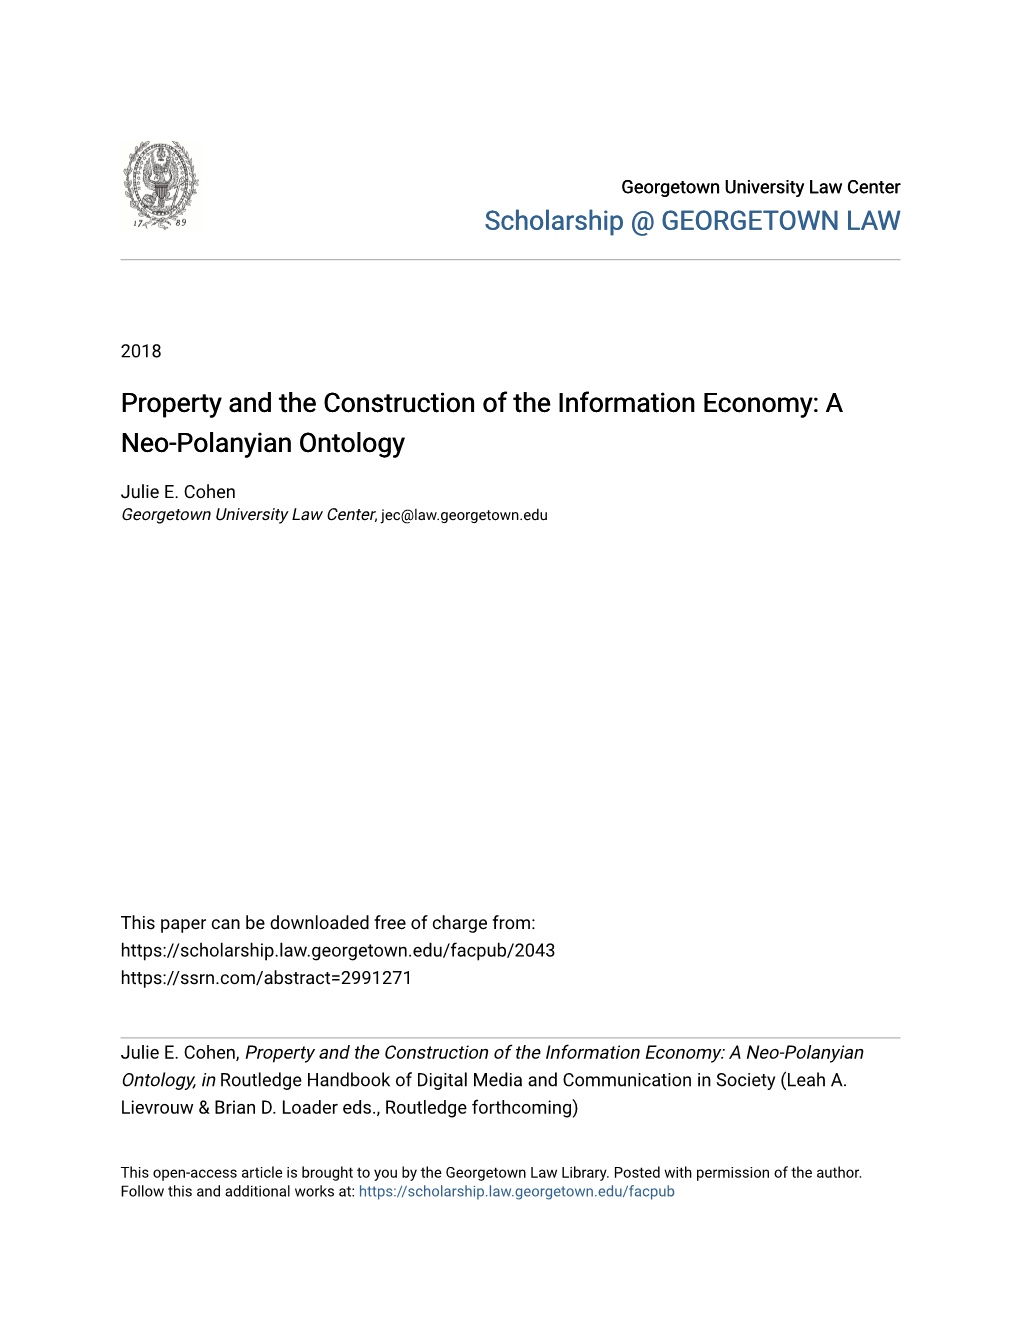 Property and the Construction of the Information Economy: a Neo-Polanyian Ontology